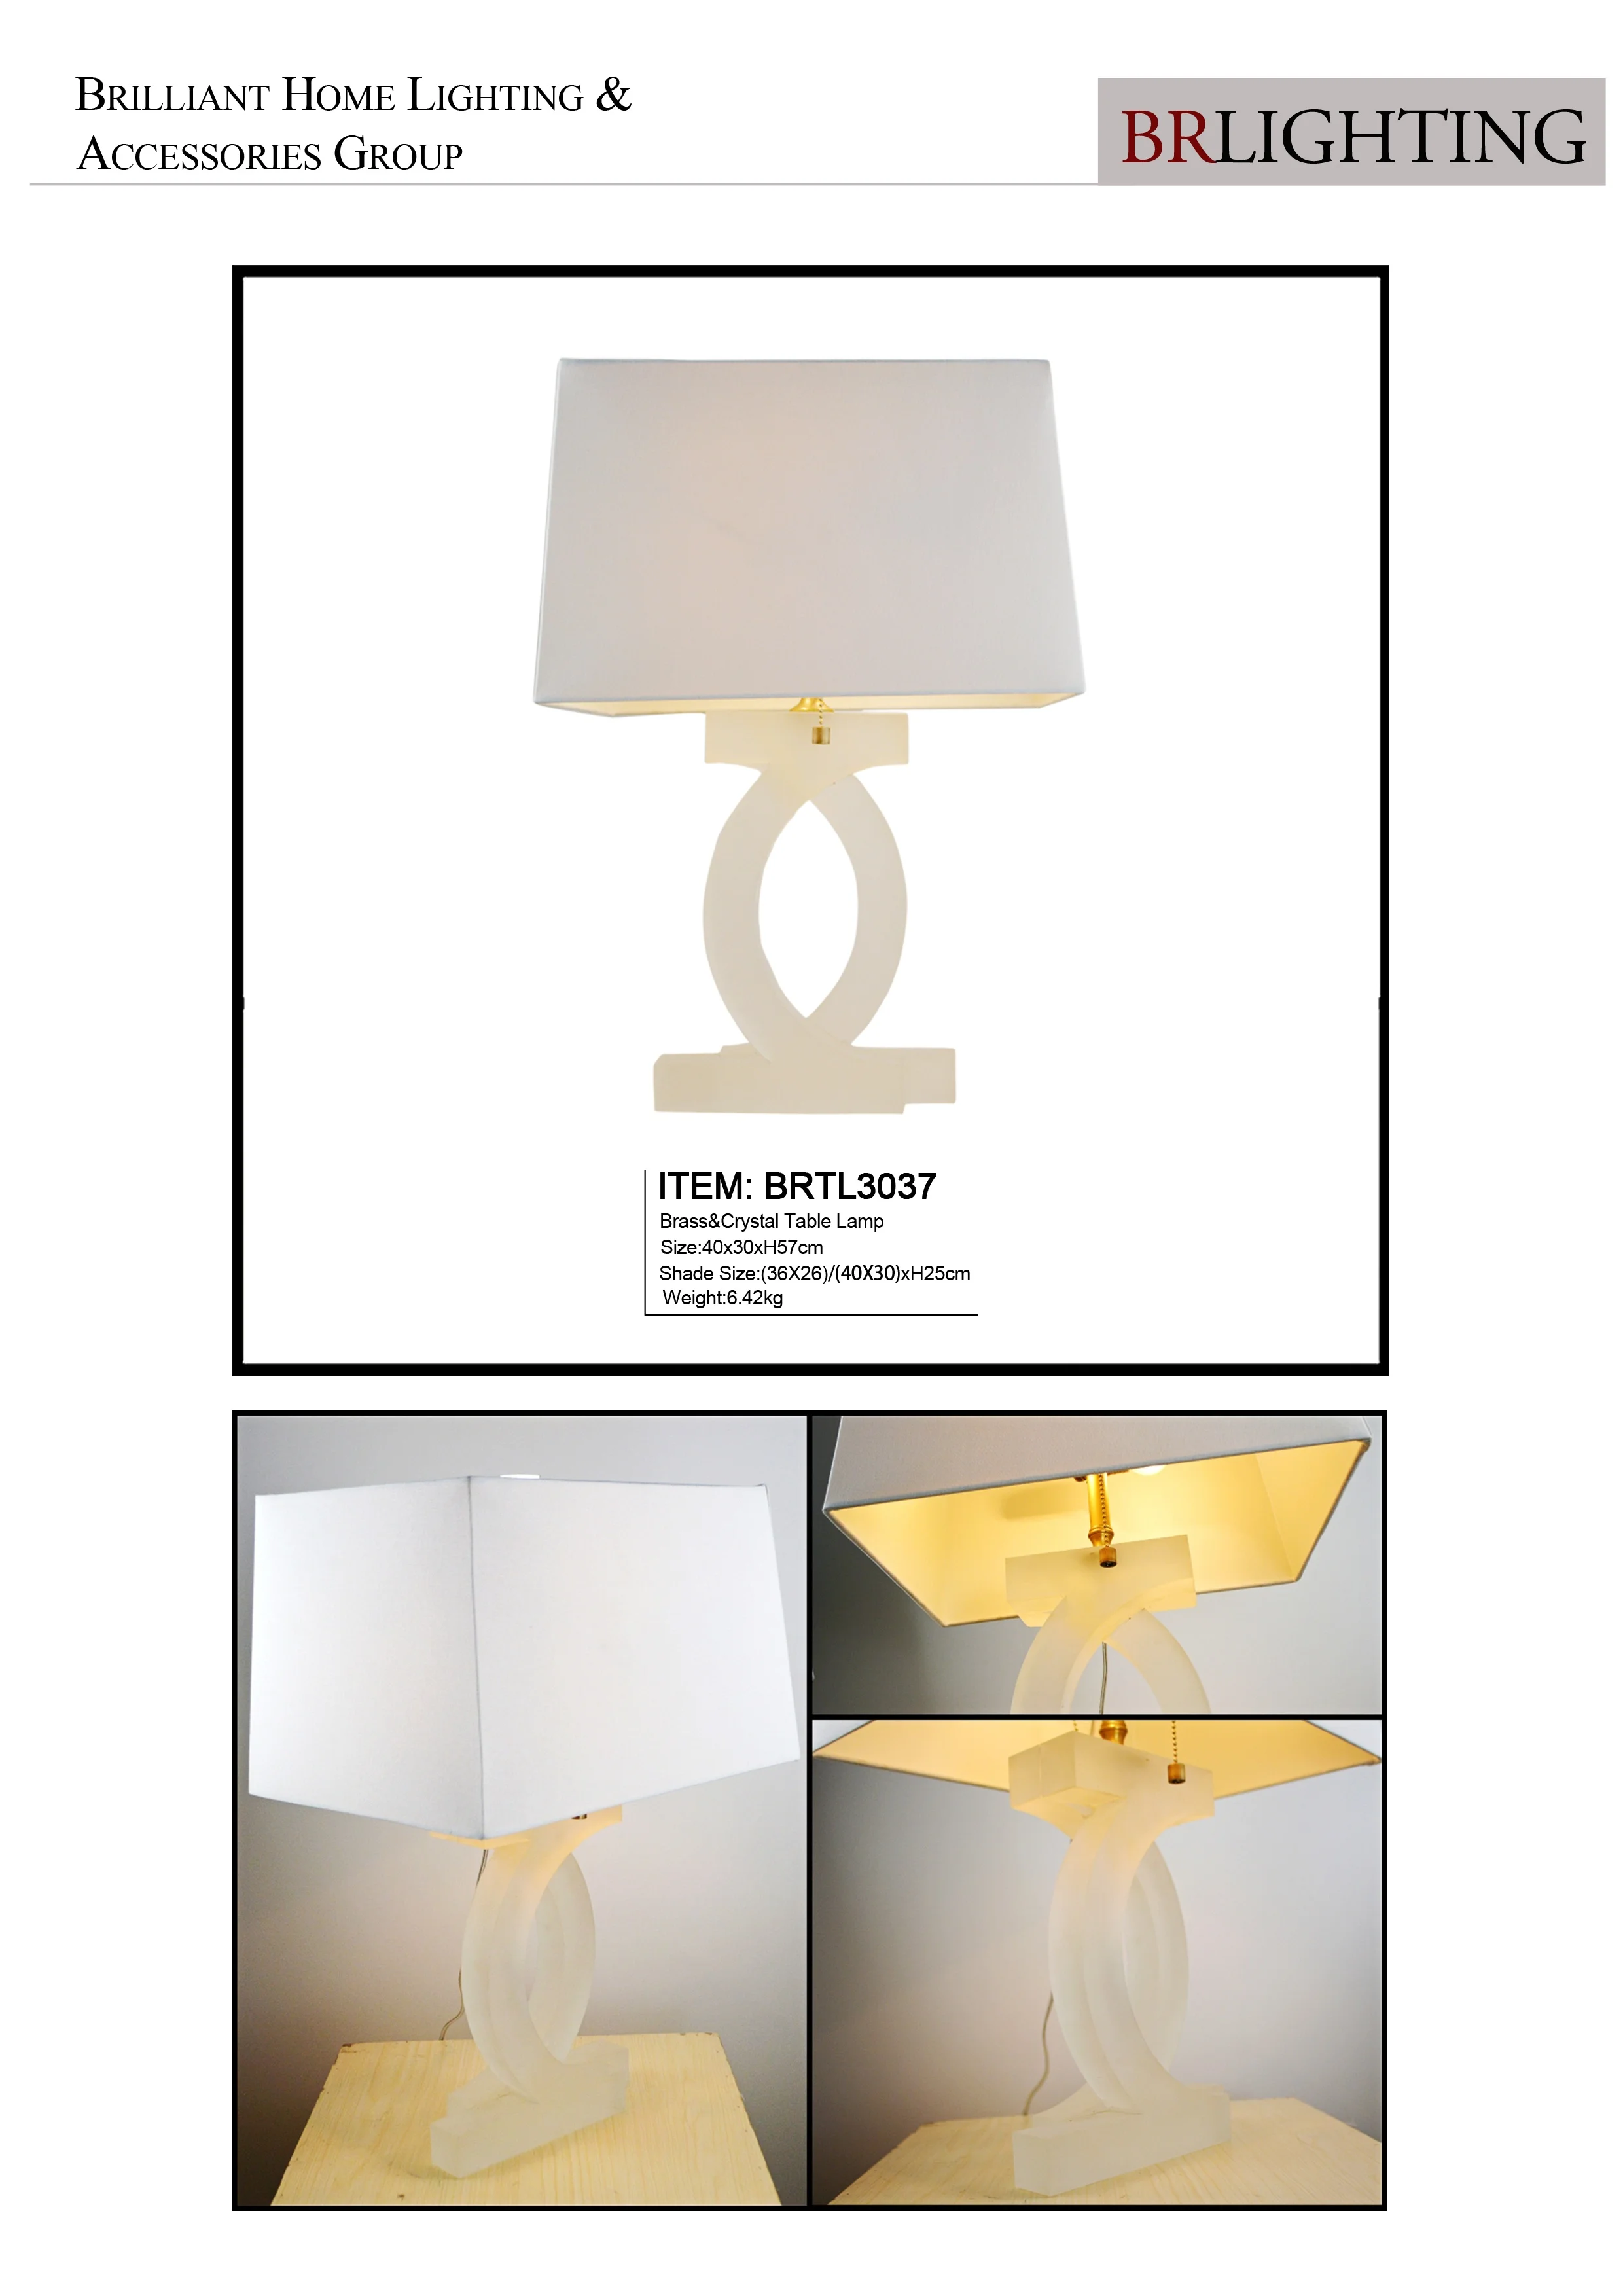 Hot aerican style brass crystal CC table lamp with lampshade for home